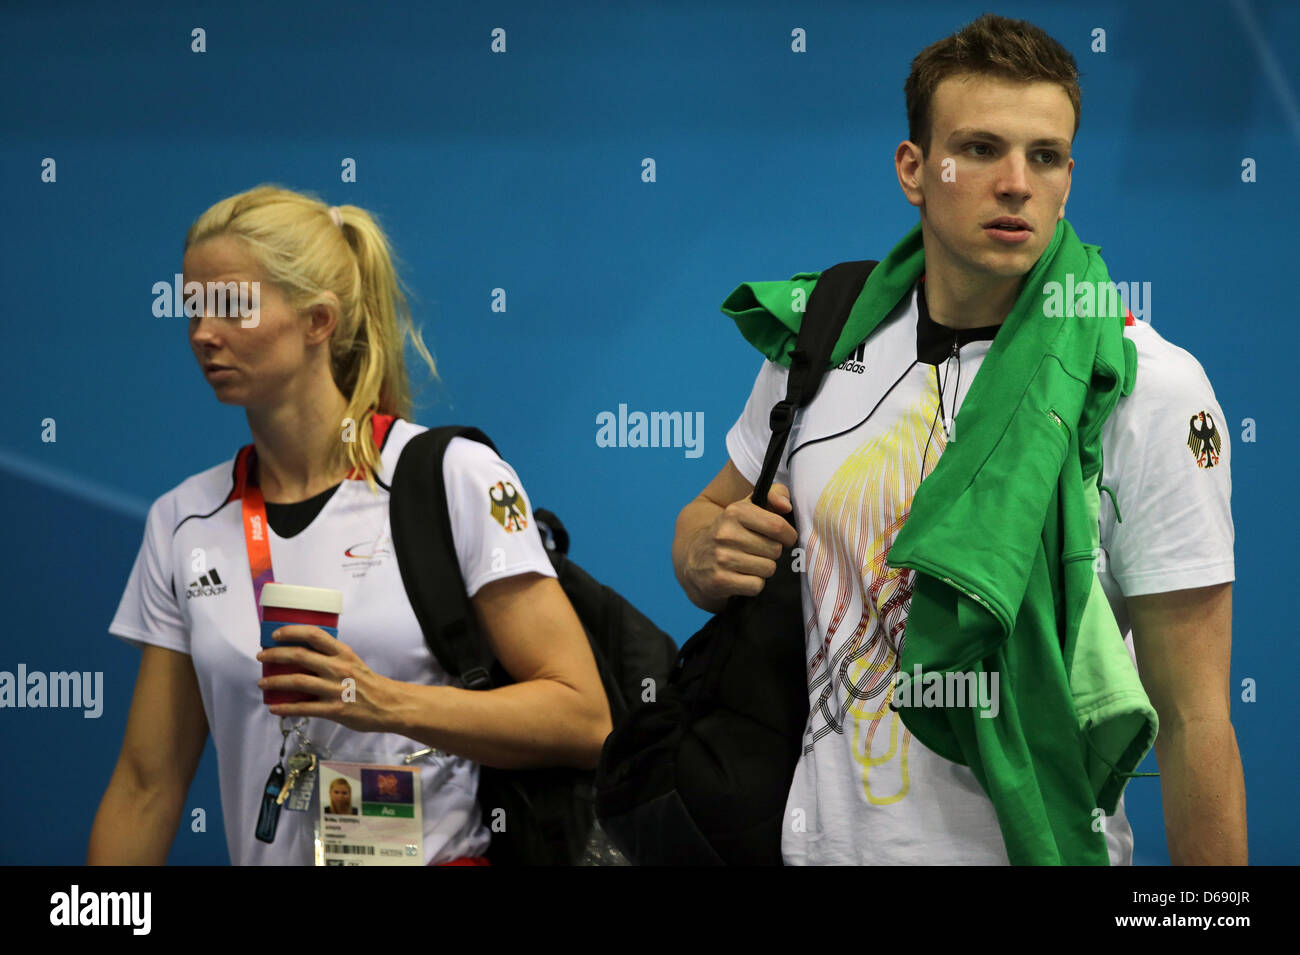 Britta Steffen (L) and Paul Biedermann of the German Olympic swimming team  seen during a training session at Aquatics Centre in London, Great Britain,  25. July 2012. The London 2012 Olympic Games